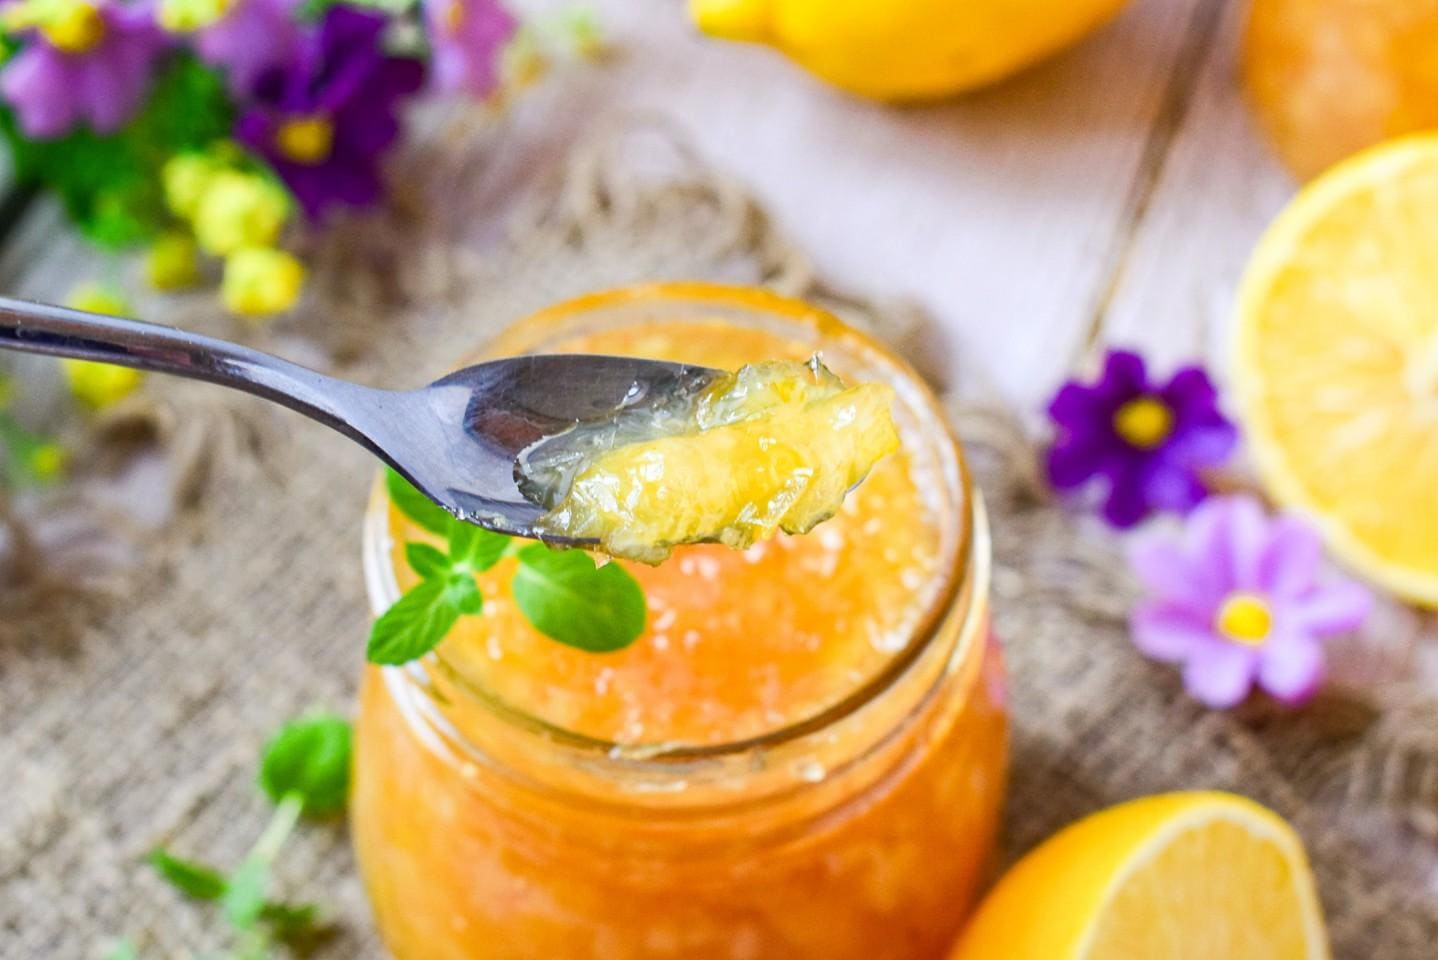 Homemade Lemon Jam: The Healthiest and Most Beautiful Delight!